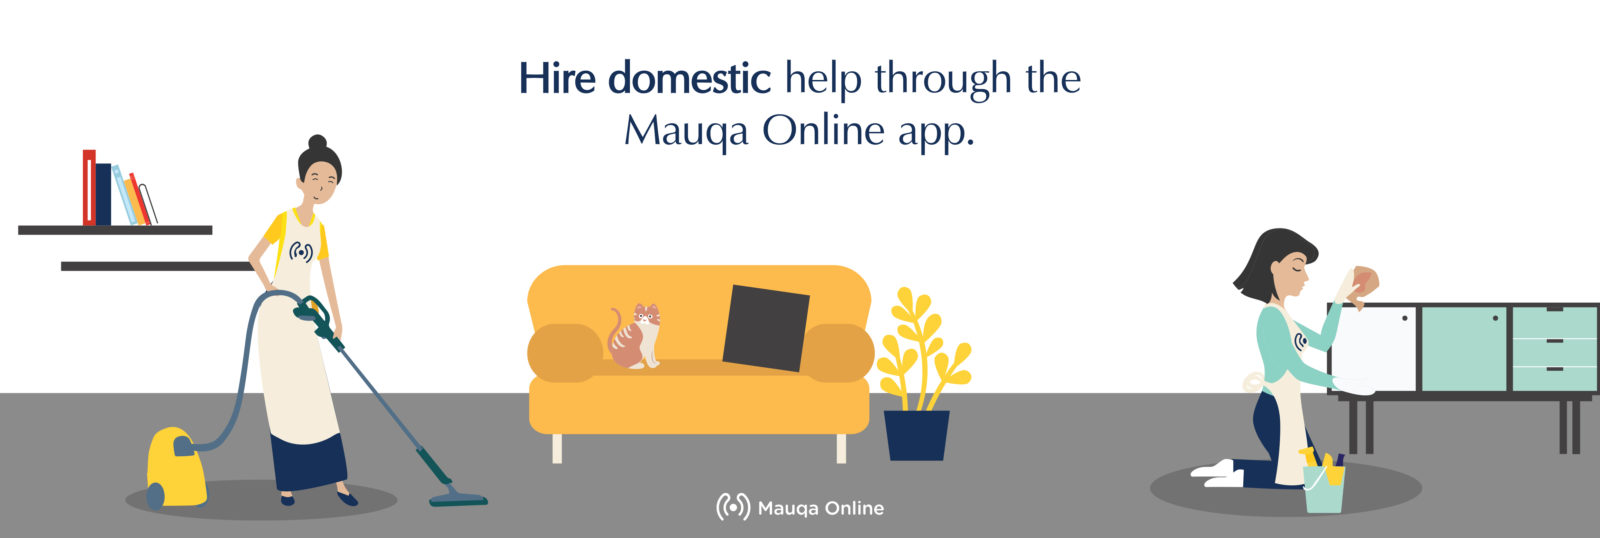 House Chores Piling Up? Mauqa Online Might Be the Answer to All Your Problems